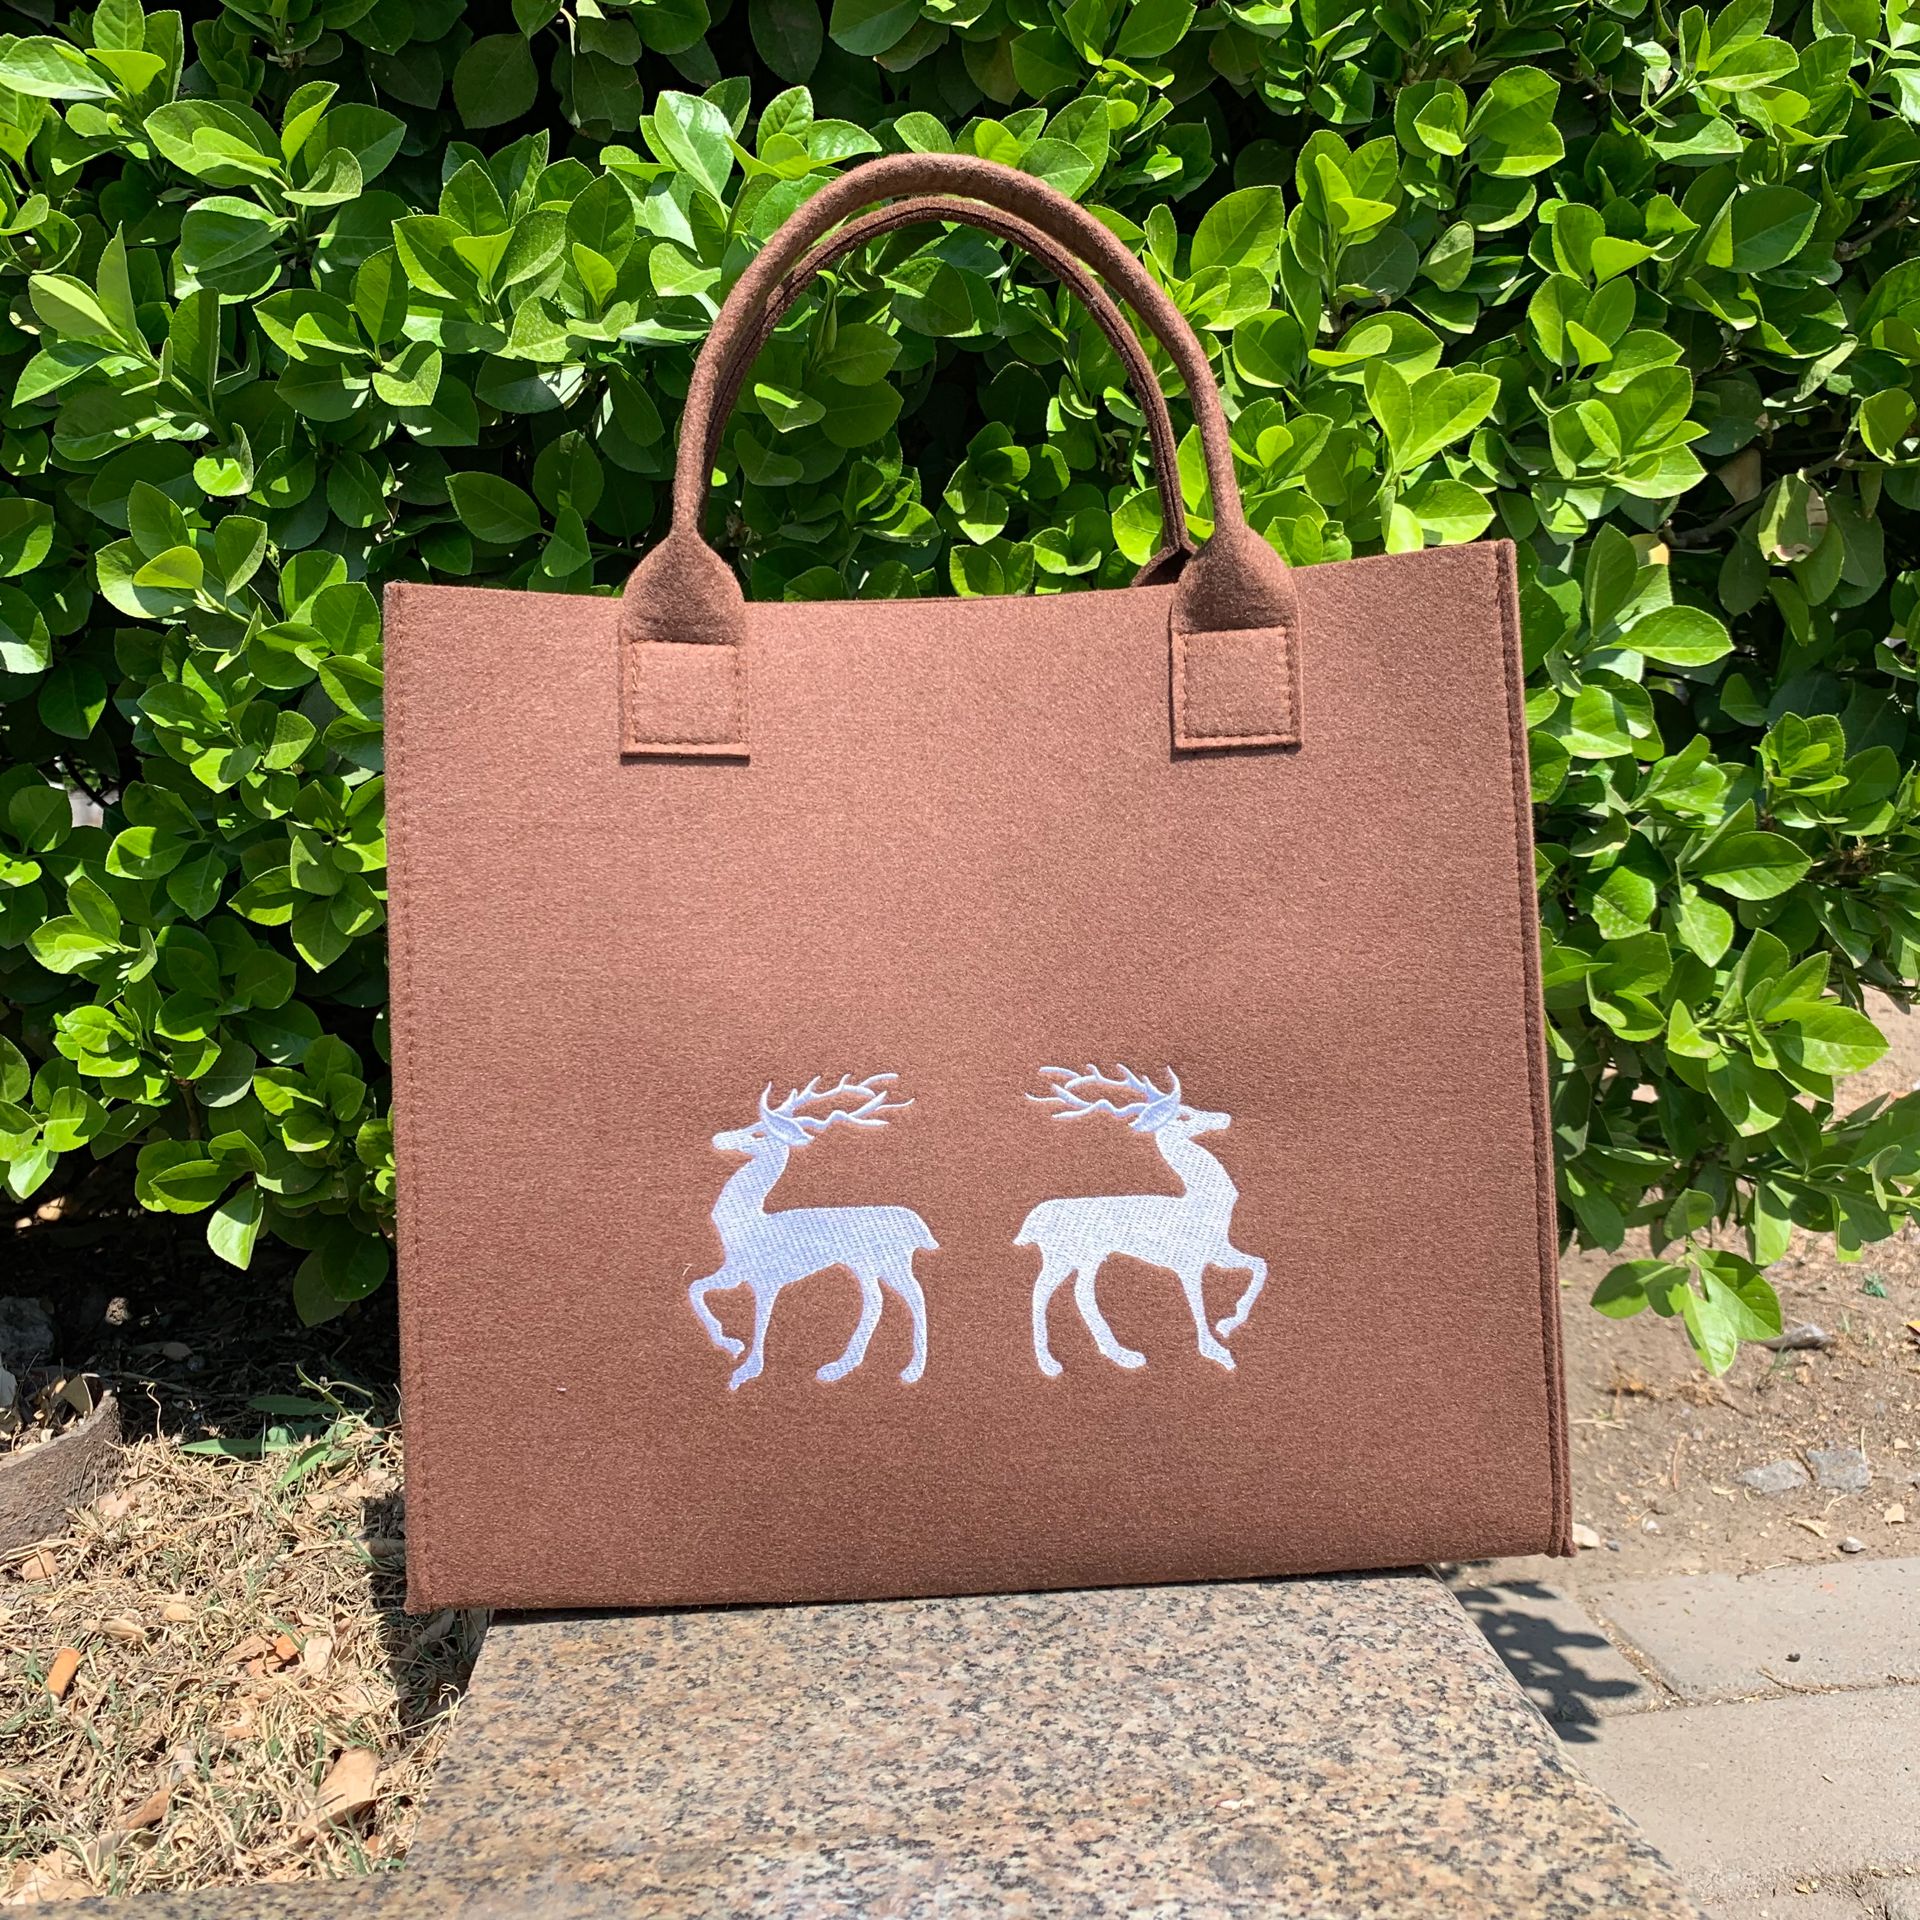 Felt Bag Deer Pads Your Shopping Safely and Has Lots of Storage Space Felt Shopping Bag Featured Image